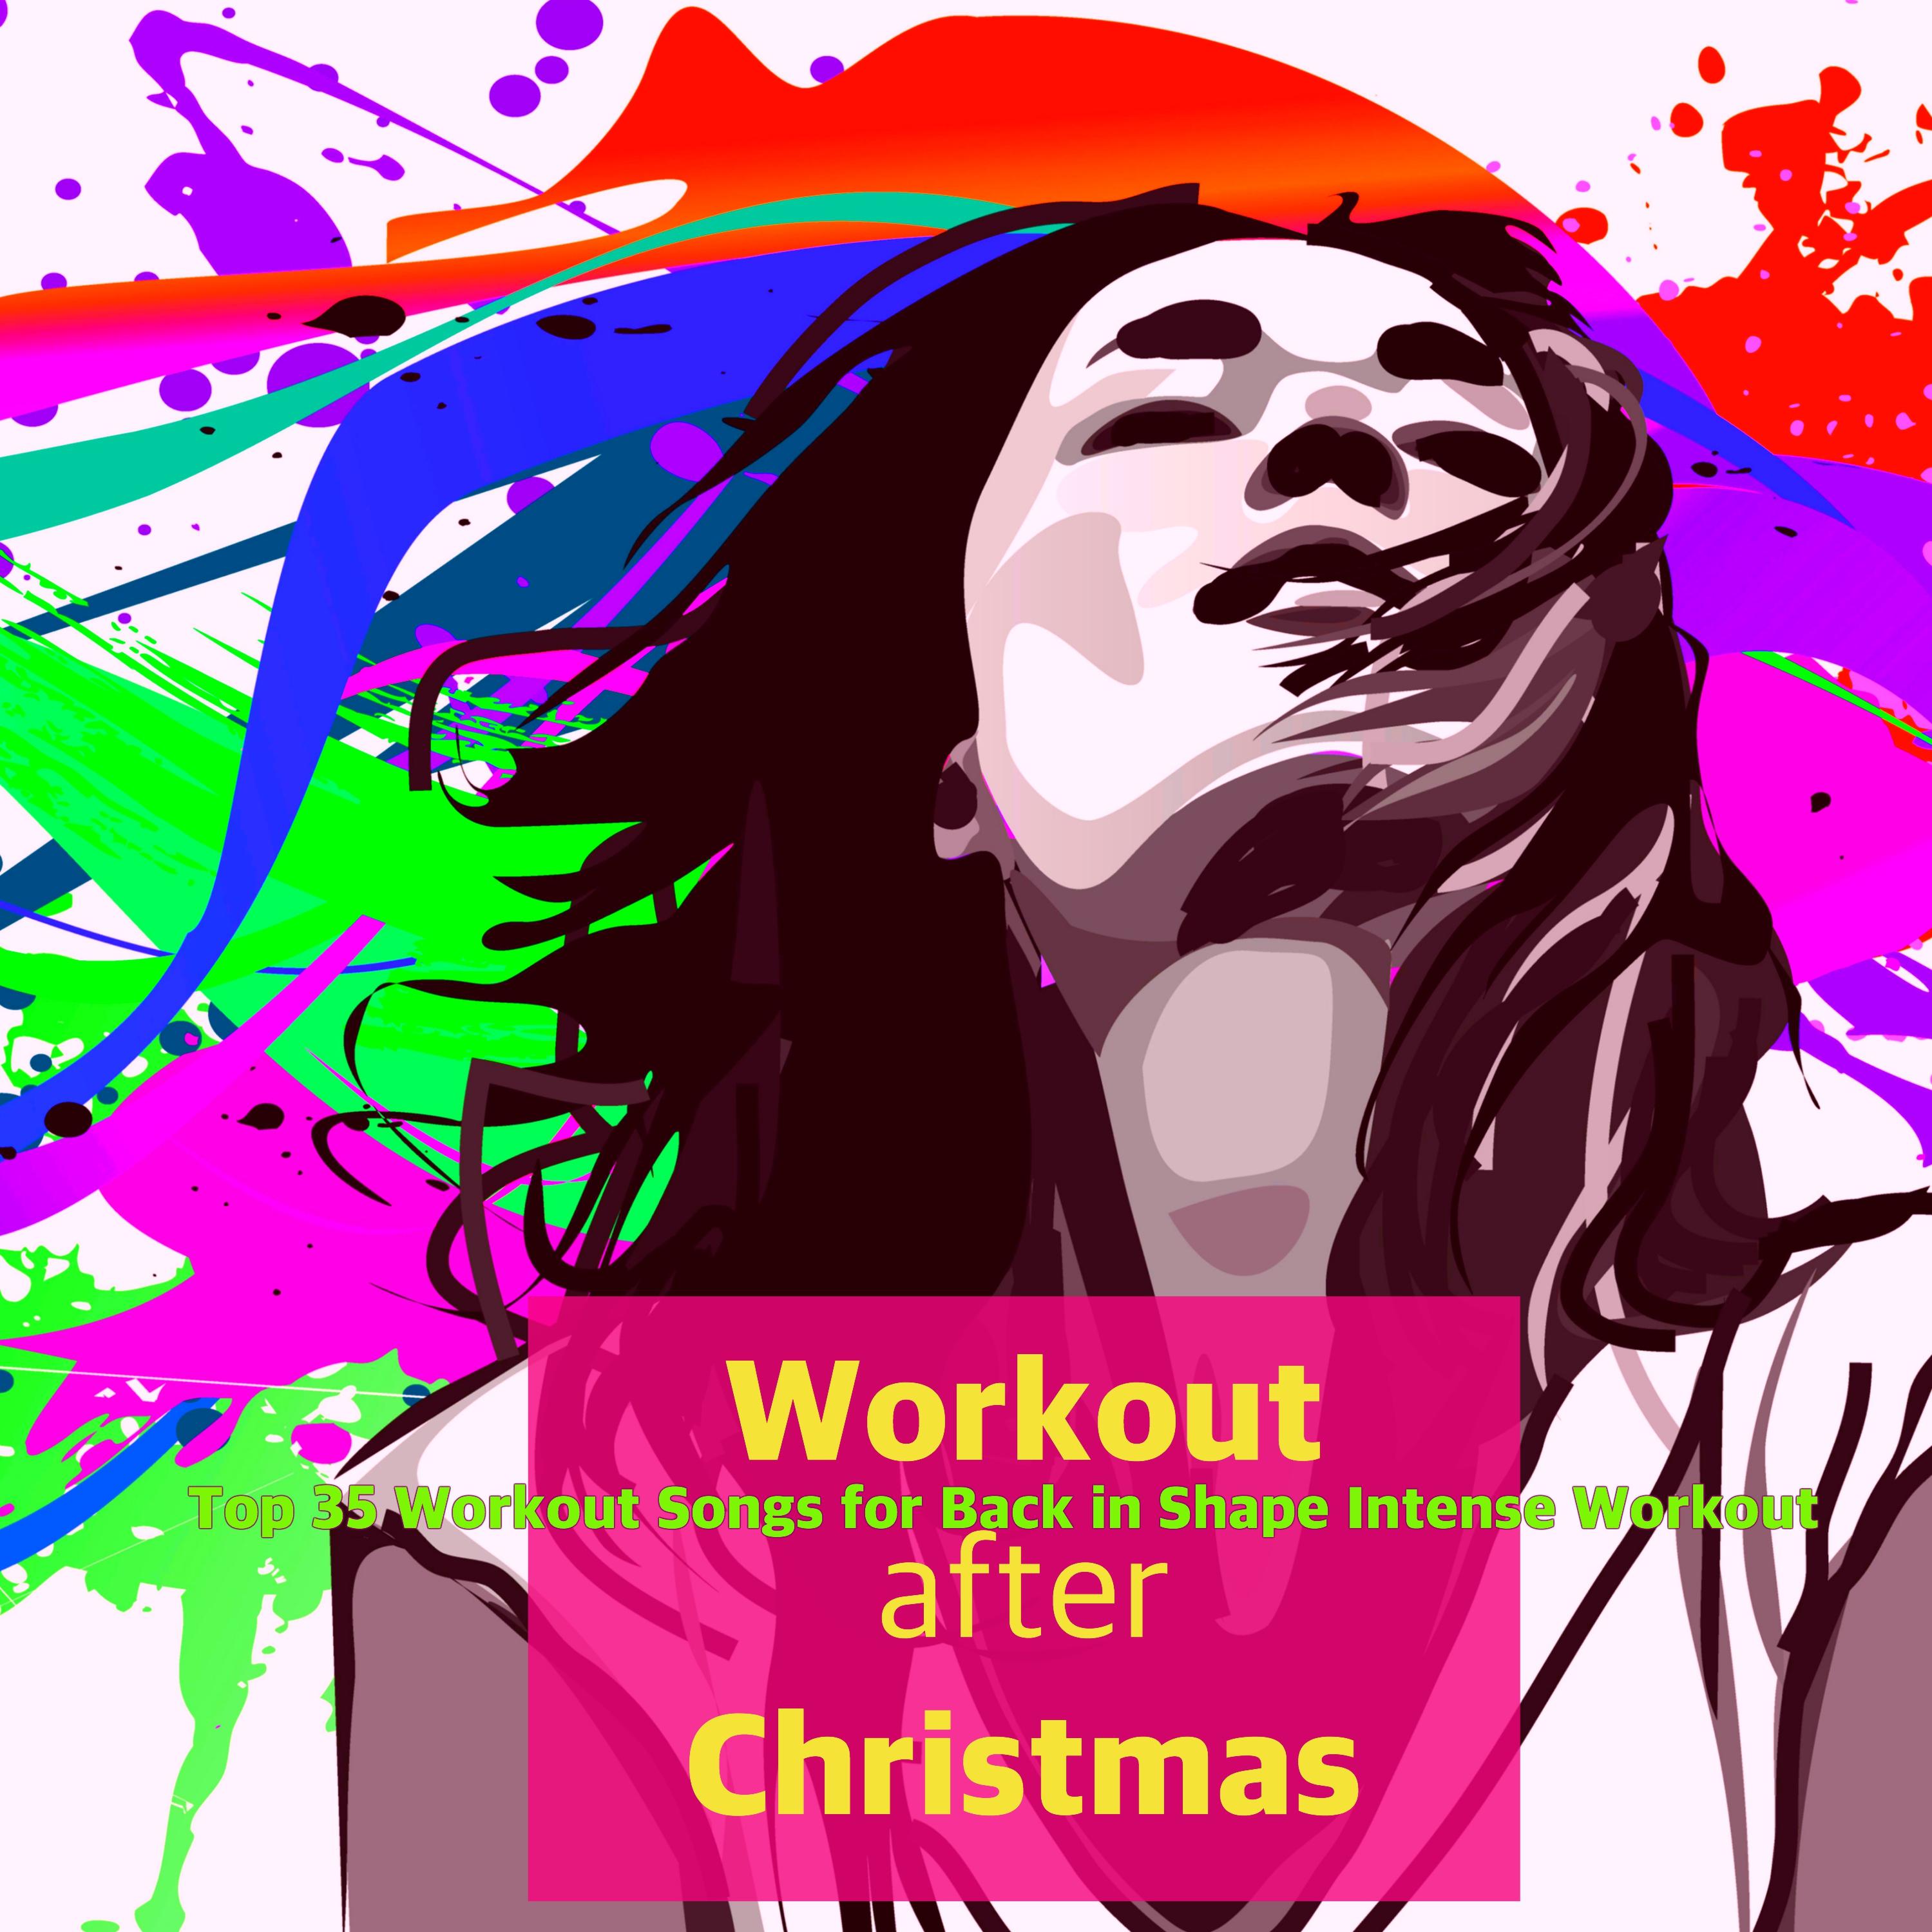 Workout after Christmas – Top 35 Workout Songs for Back in Shape Intense Workout